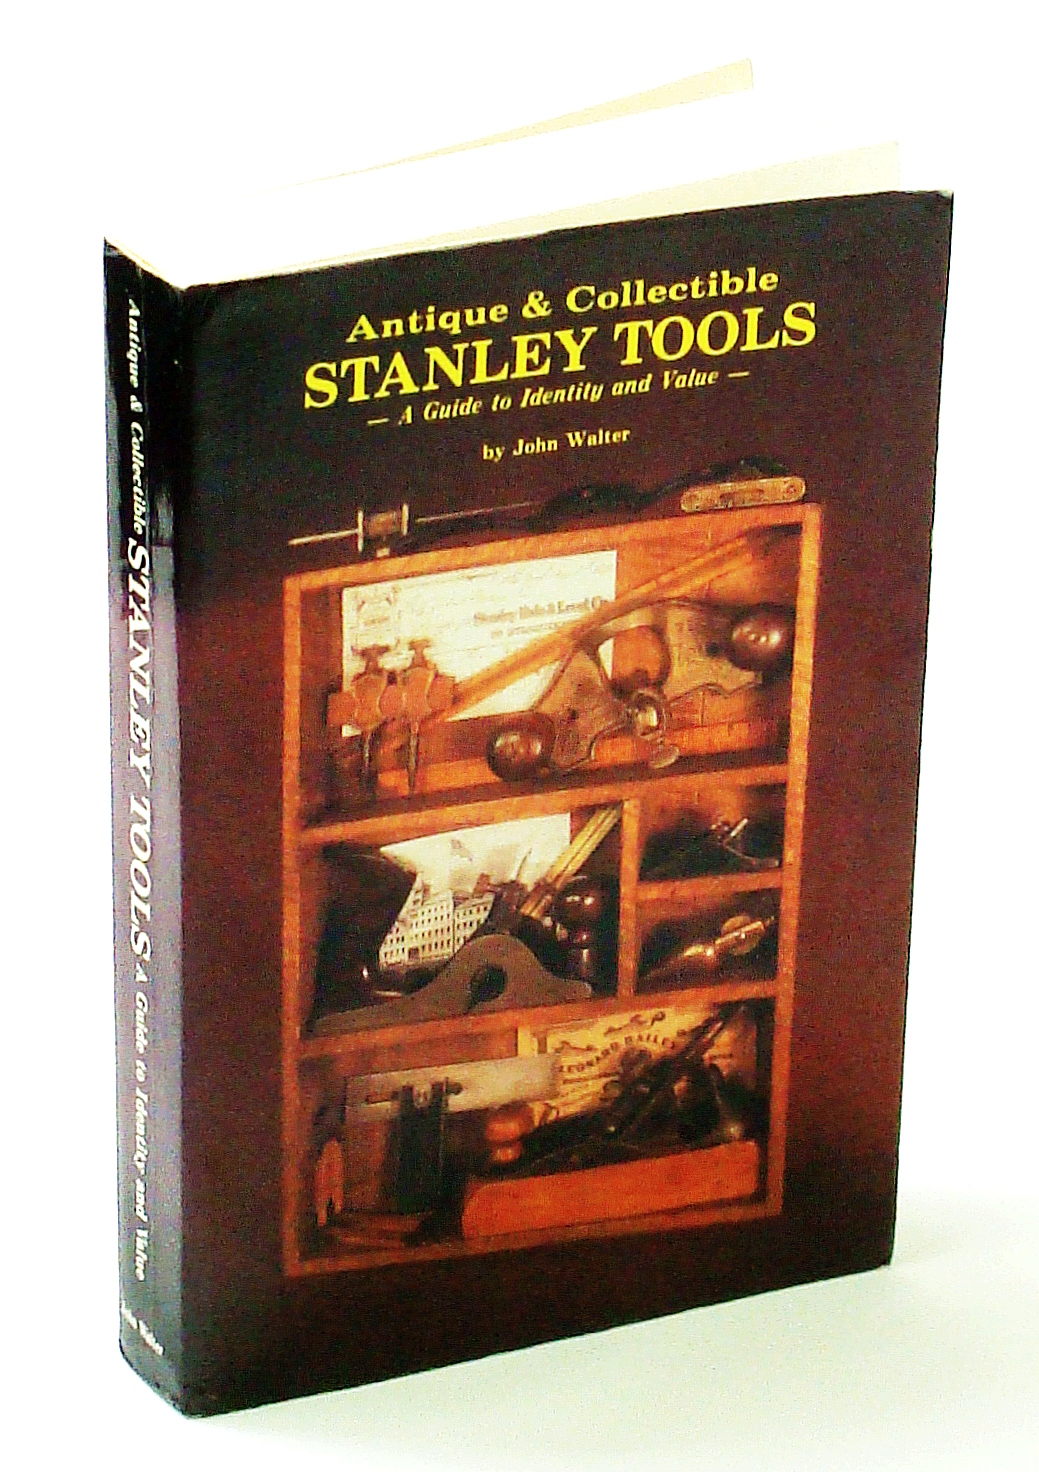 WALTER, JOHN - Antique and Collectible Stanley Tools, a Guide to Identity and Value